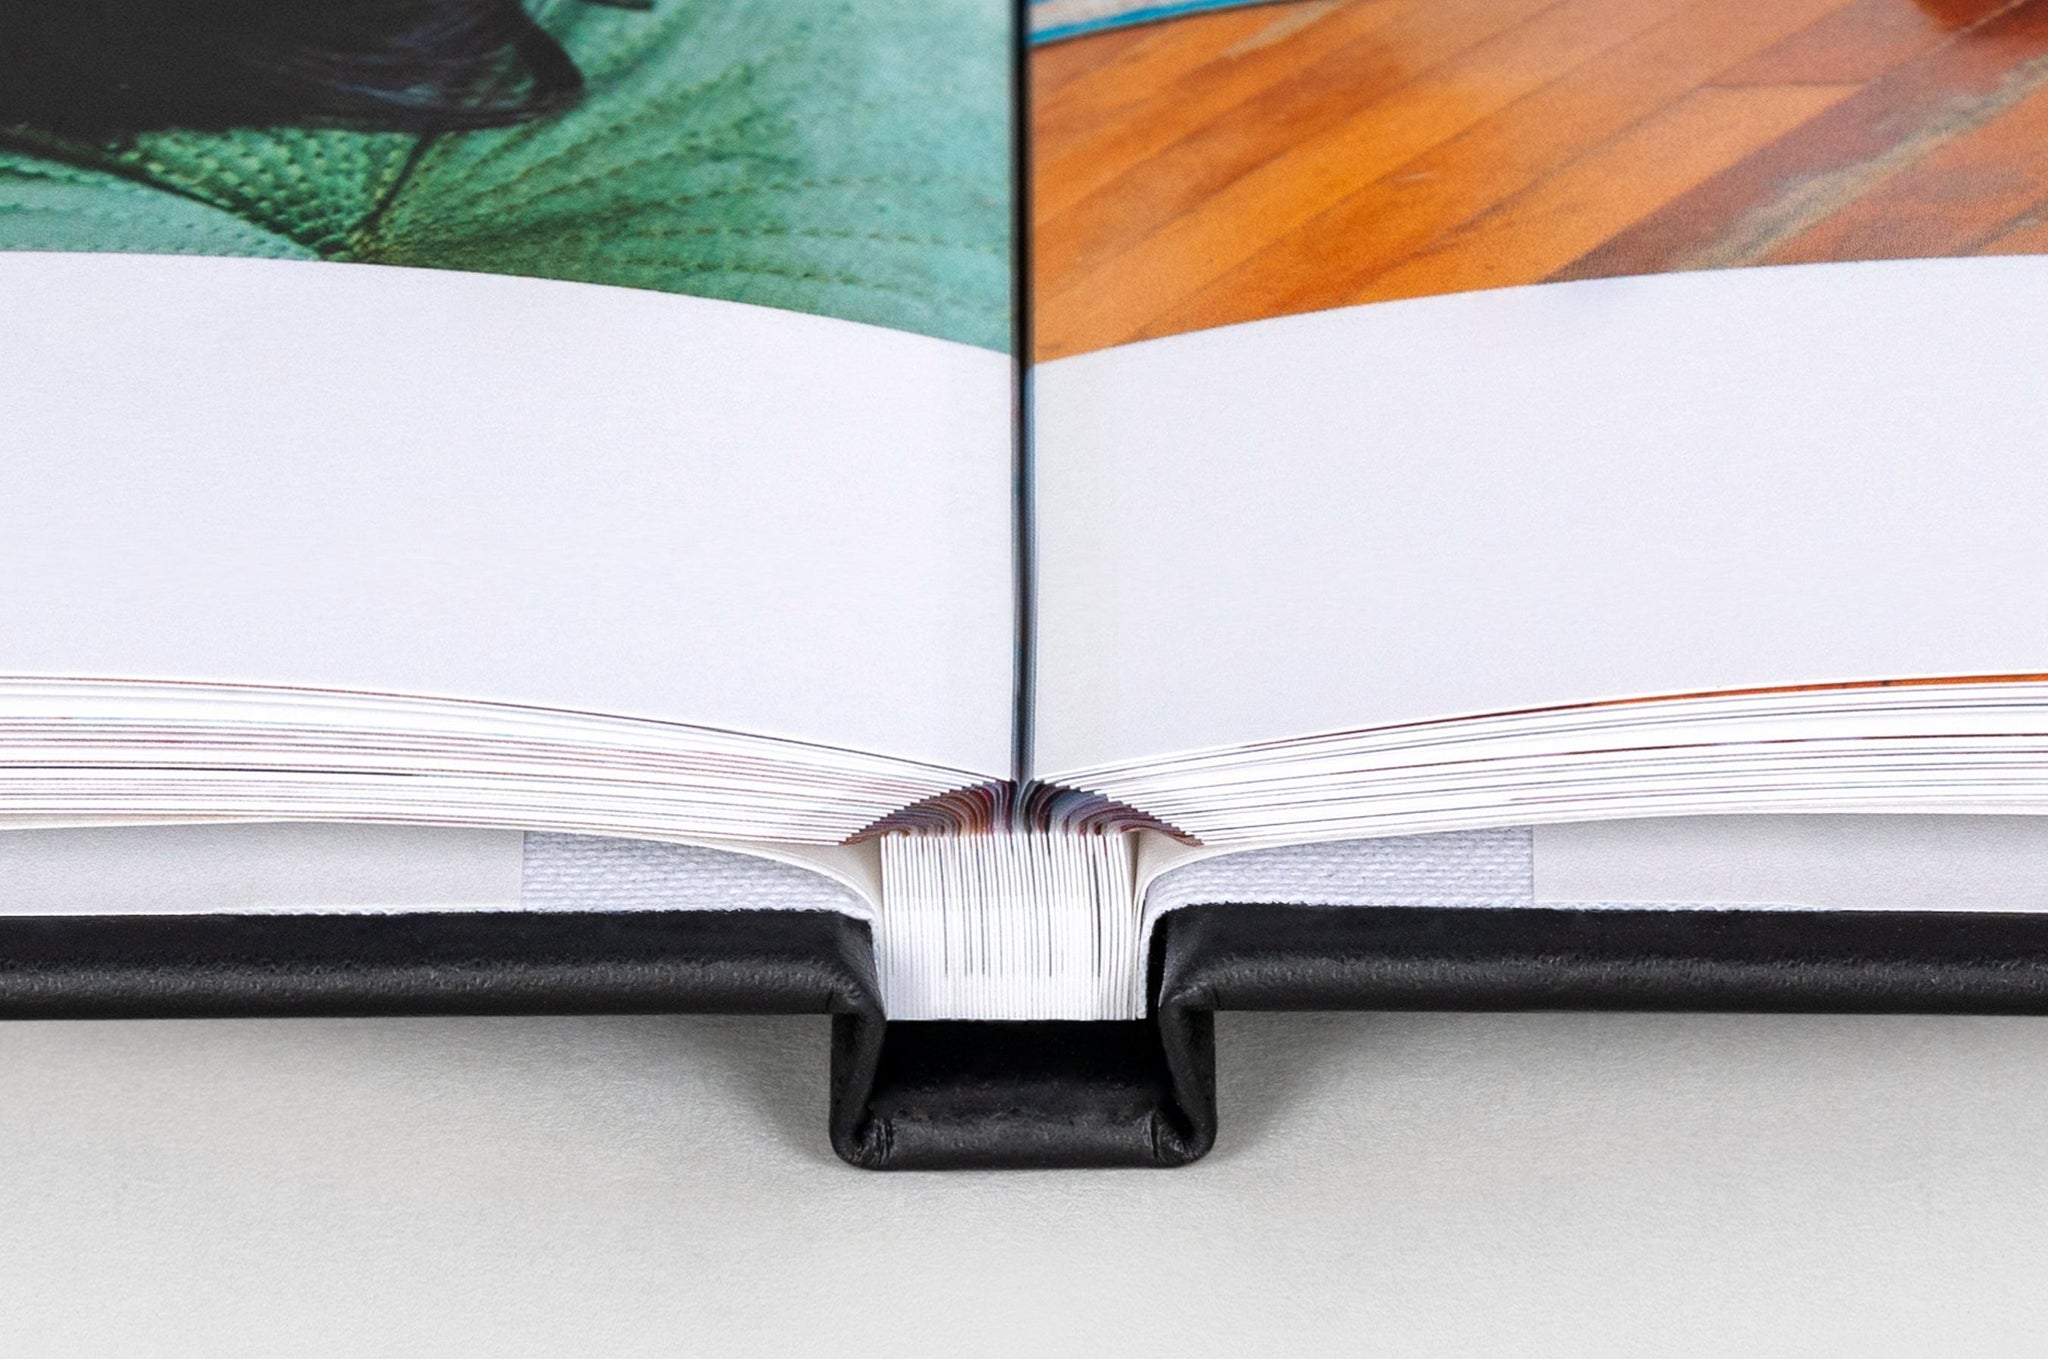 Lay Flat Photo Book binding detail shot. Lay Flat pages are designed to allow Photo book pages to lay flat. 